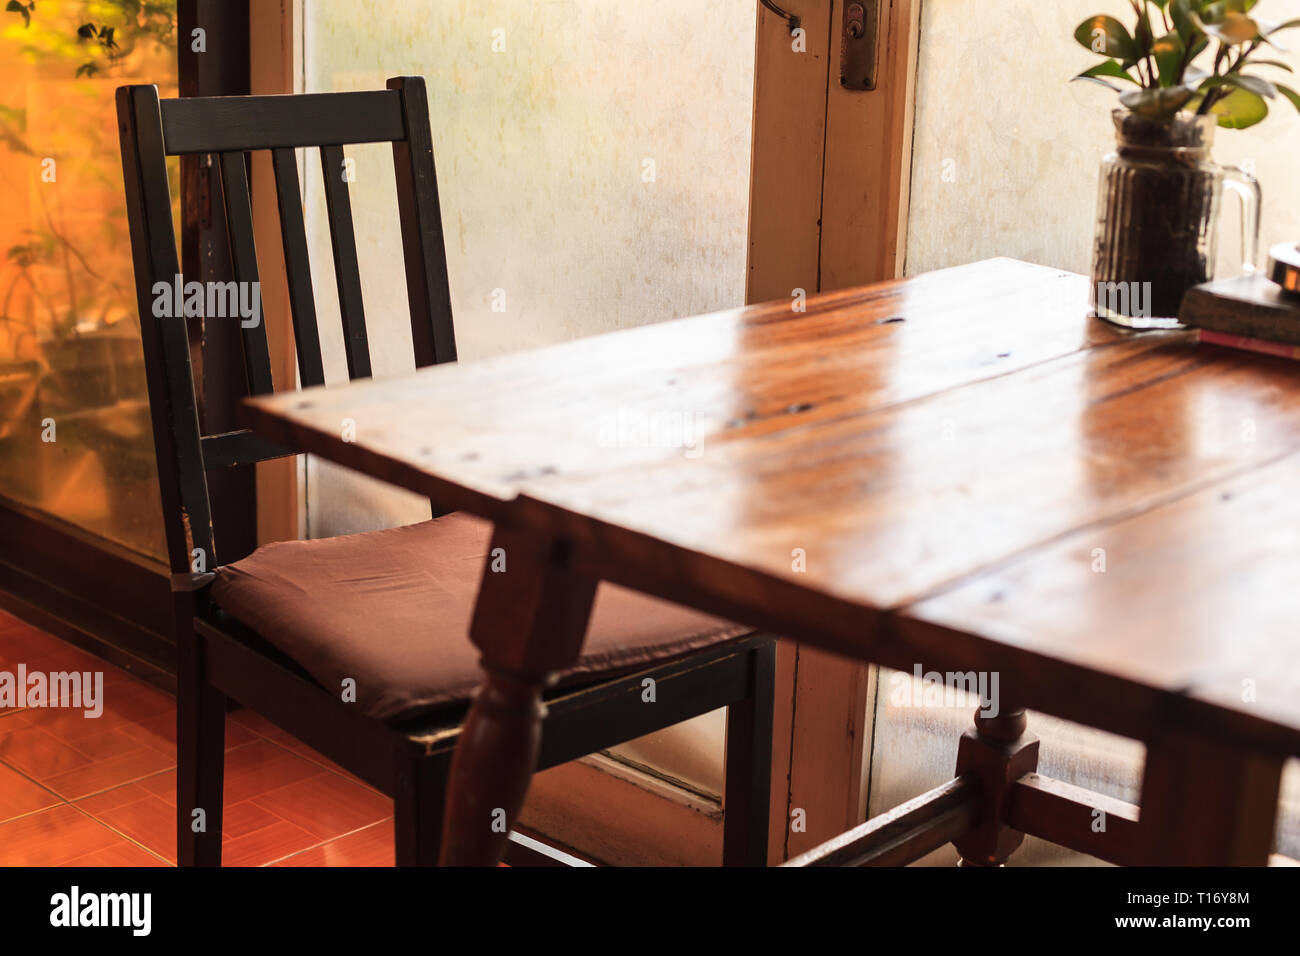 Rustic Wooden Table And Chairs With Warm Natural Light